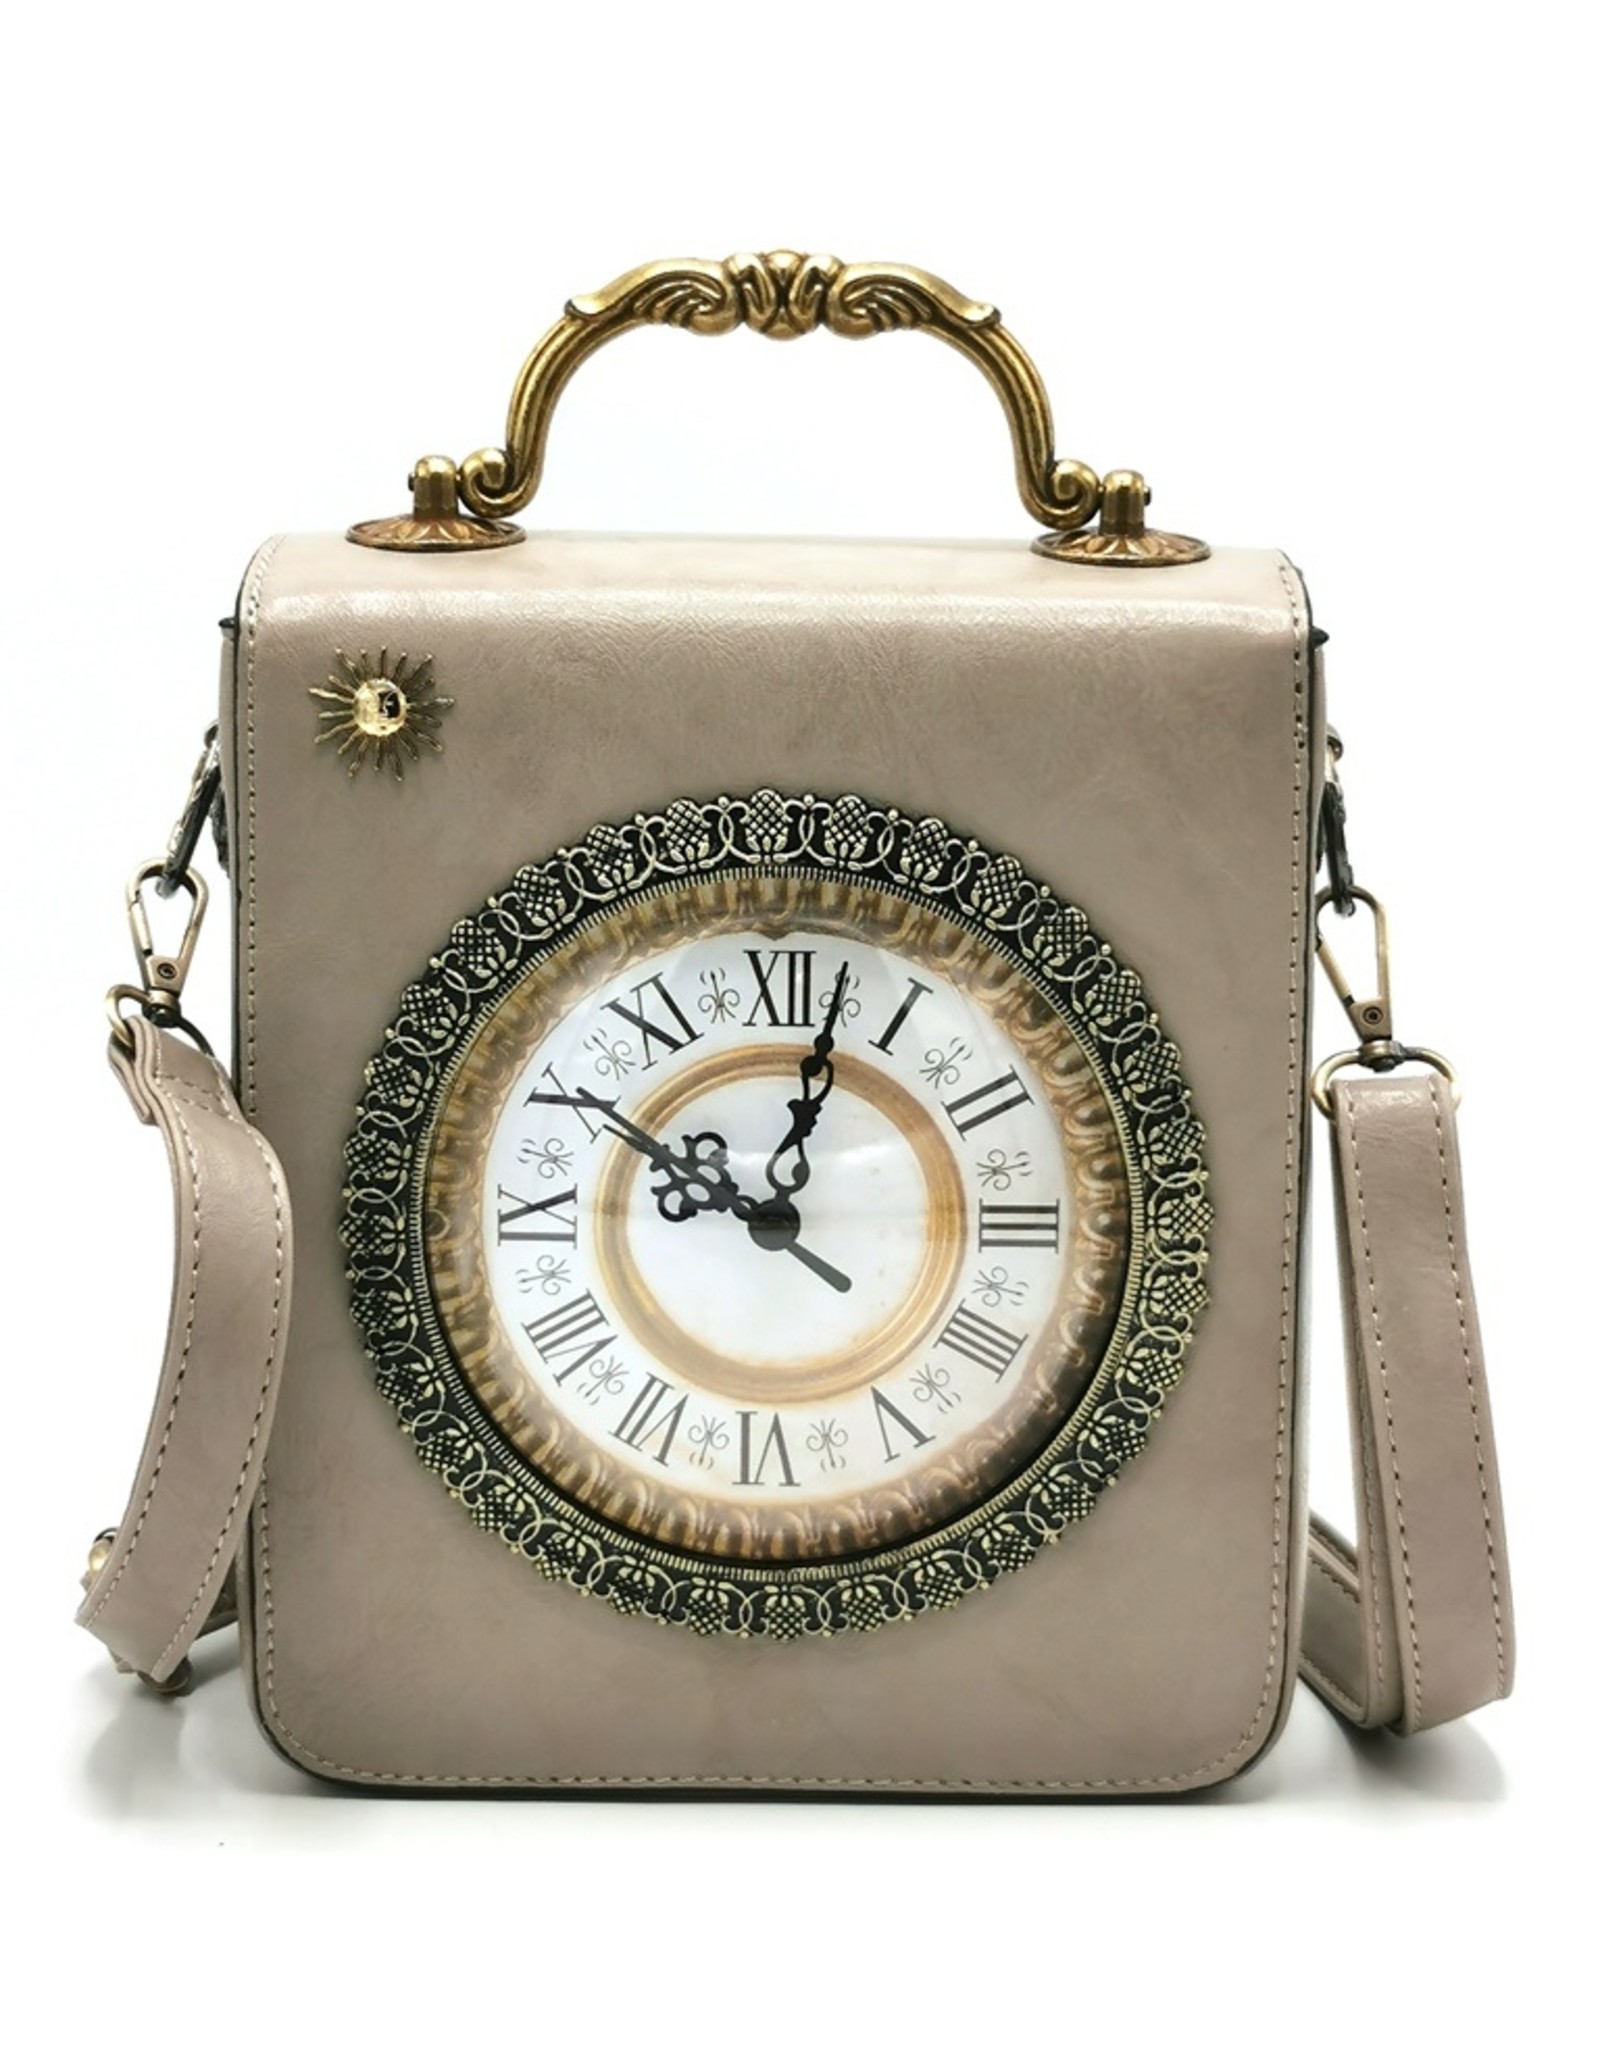 Magic Bags Retro bags  Vintage bags - Clock bag with Working Clock and Embroidery  grey